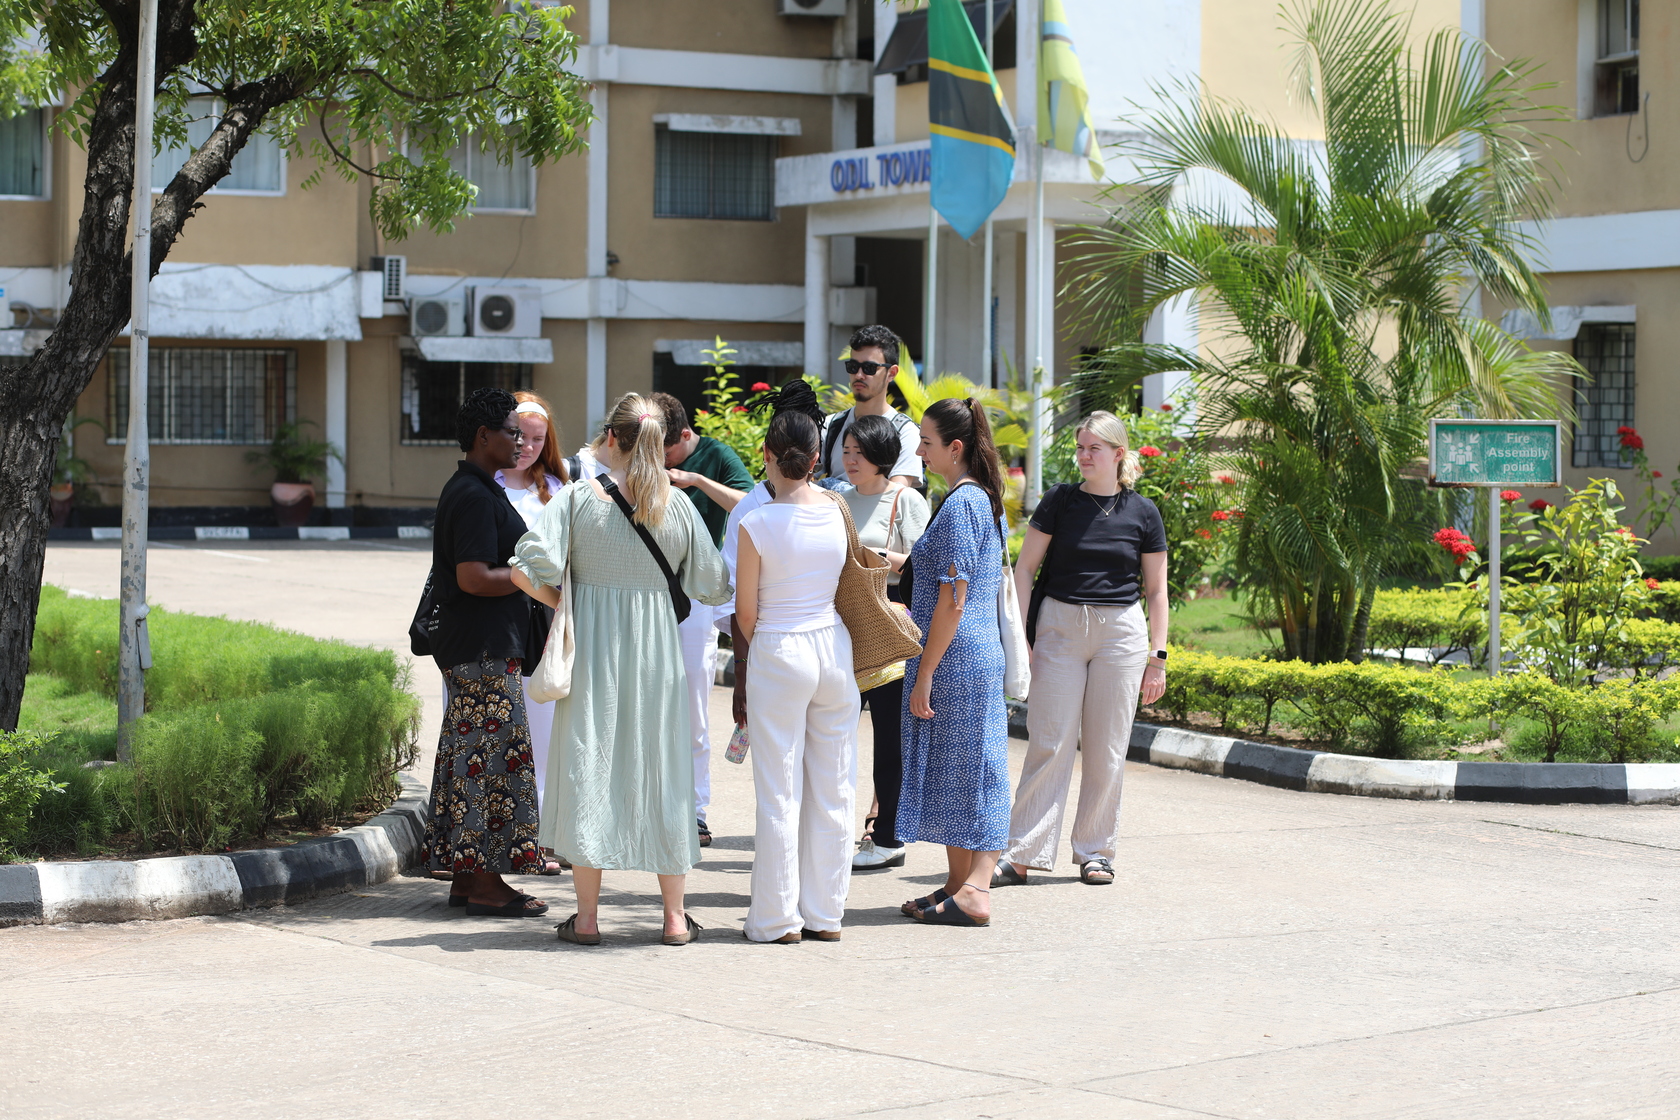 Arrival of seventeen students and five lecturers from two Norwegian Universities.